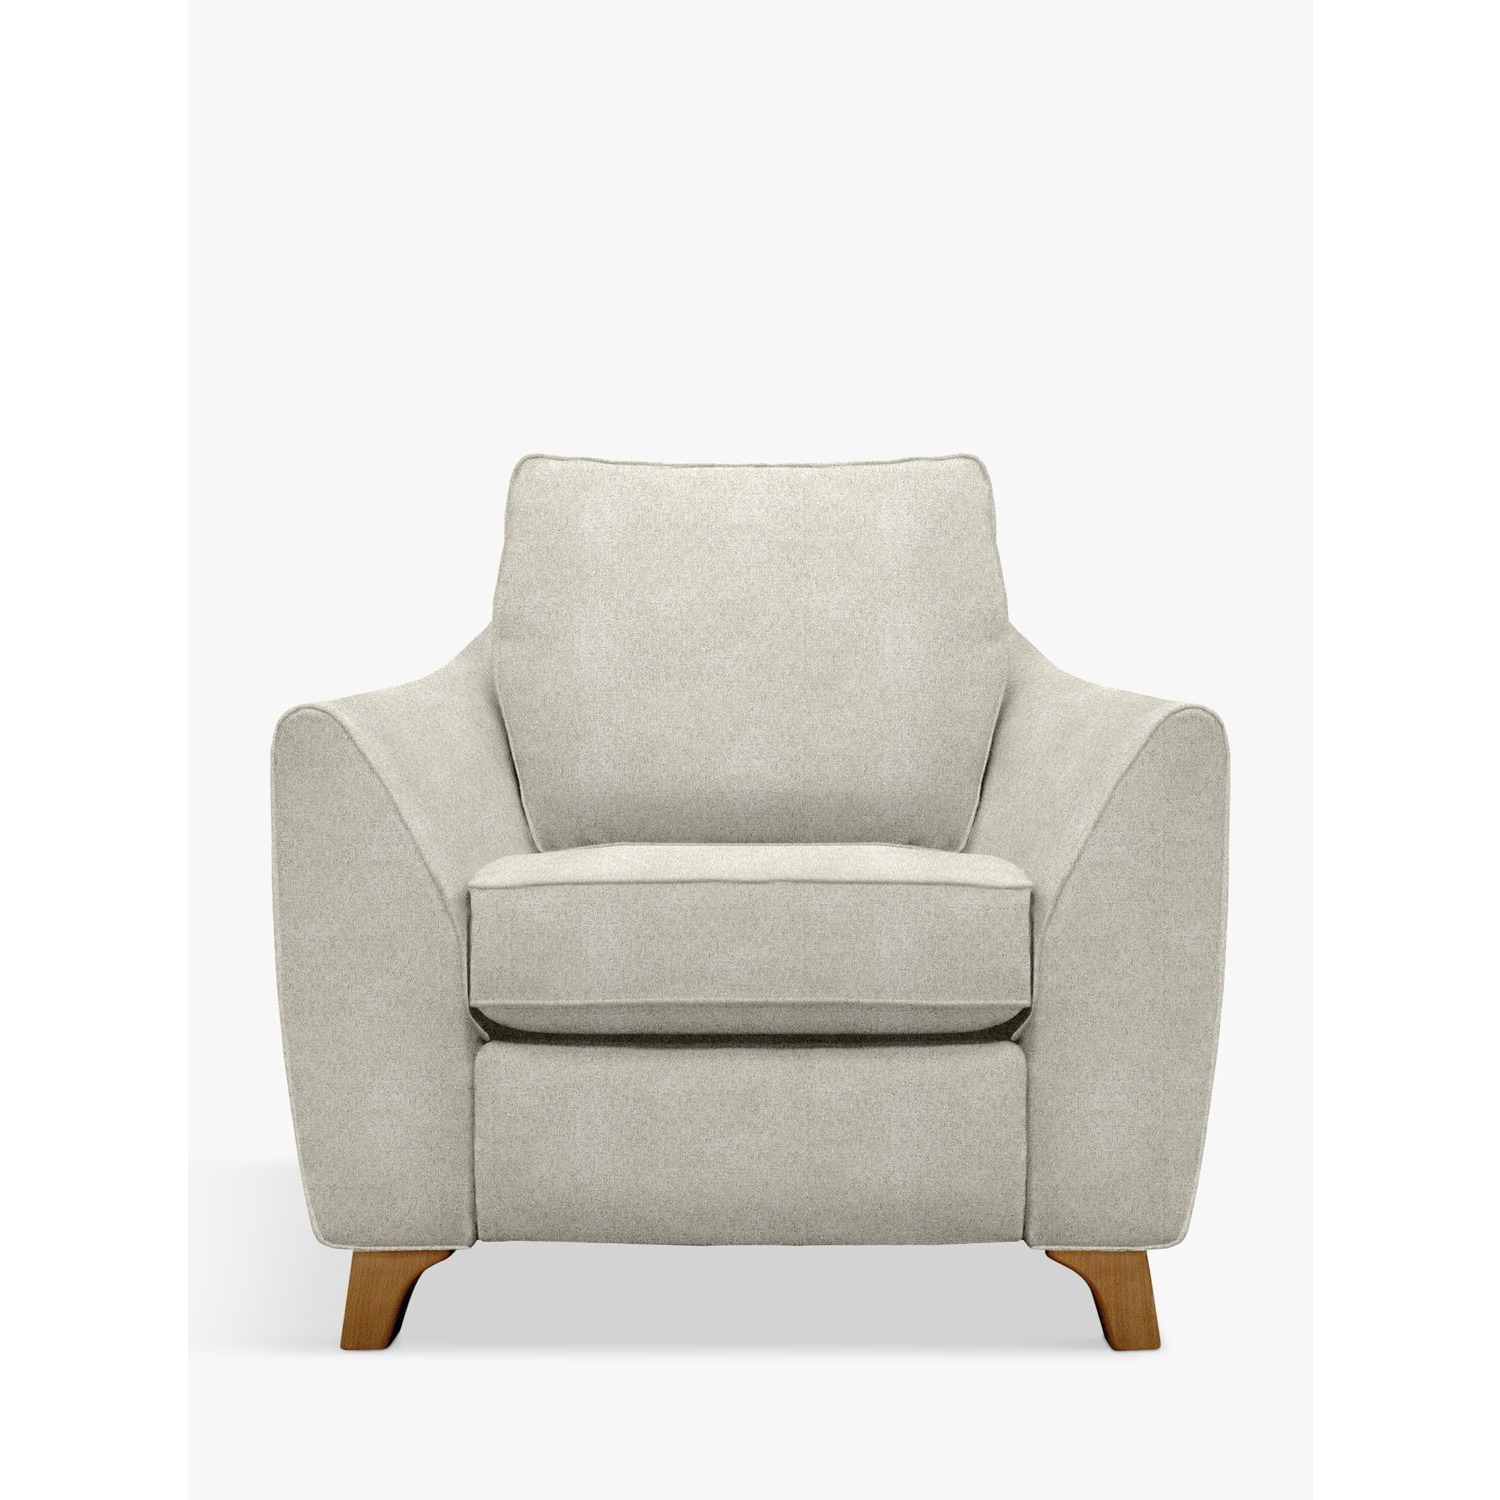 G Plan Vintage The Sixty Eight Armchair with Footrest Mechanism - image 1